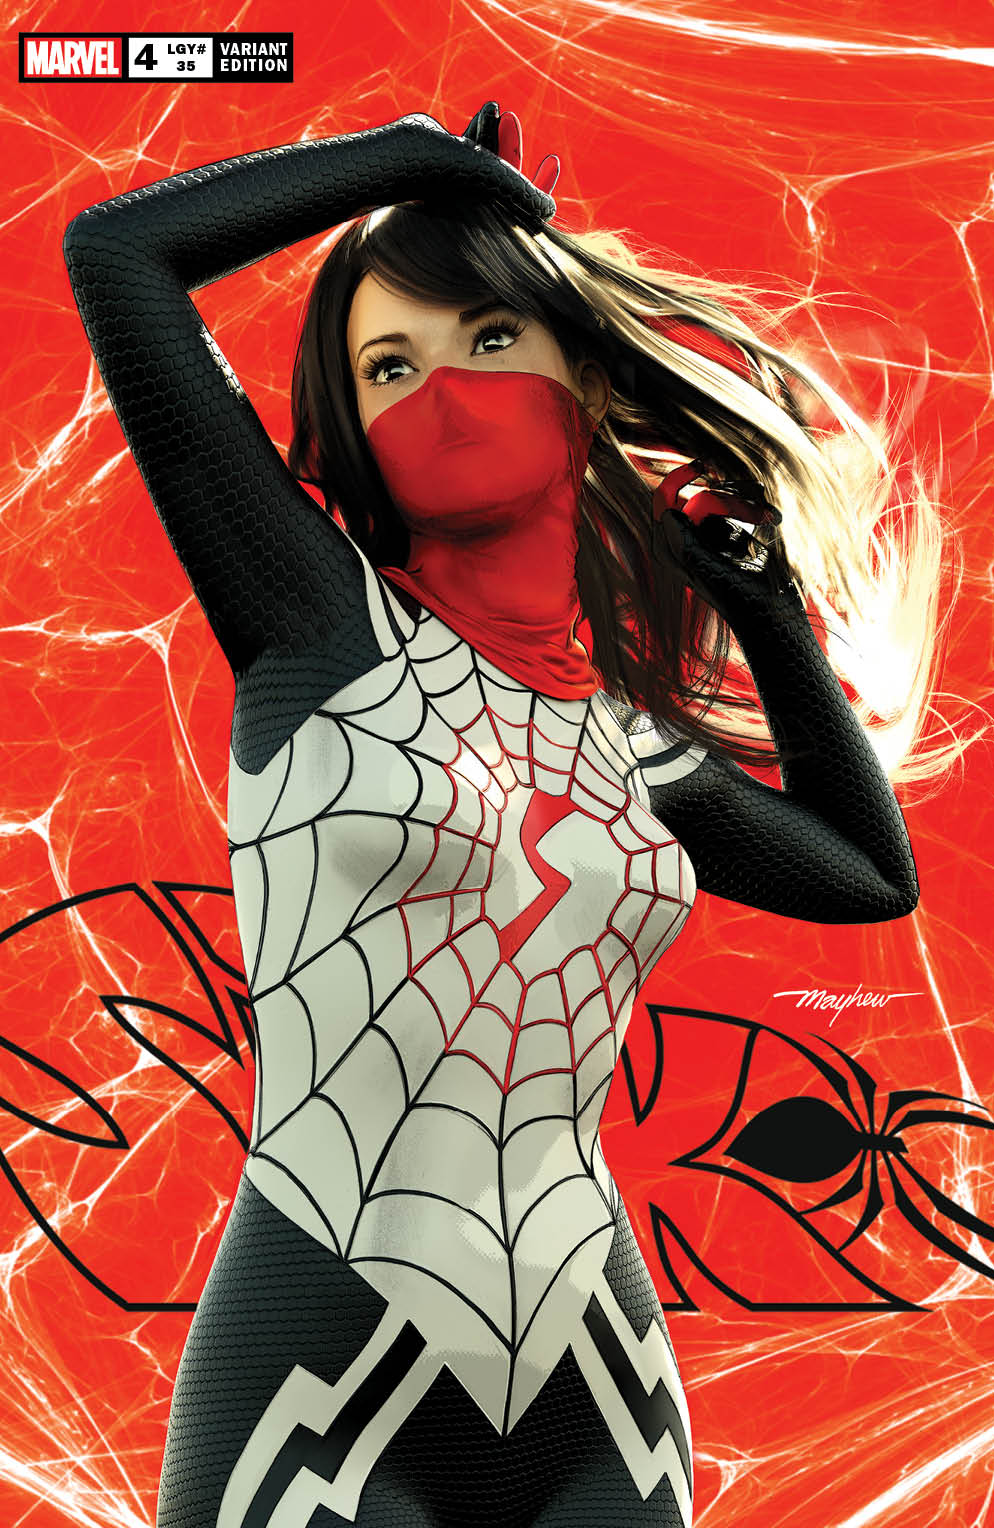 SILK #4 MIKE MAYHEW TRADE DRESS VARIANT LIMITED TO 3000